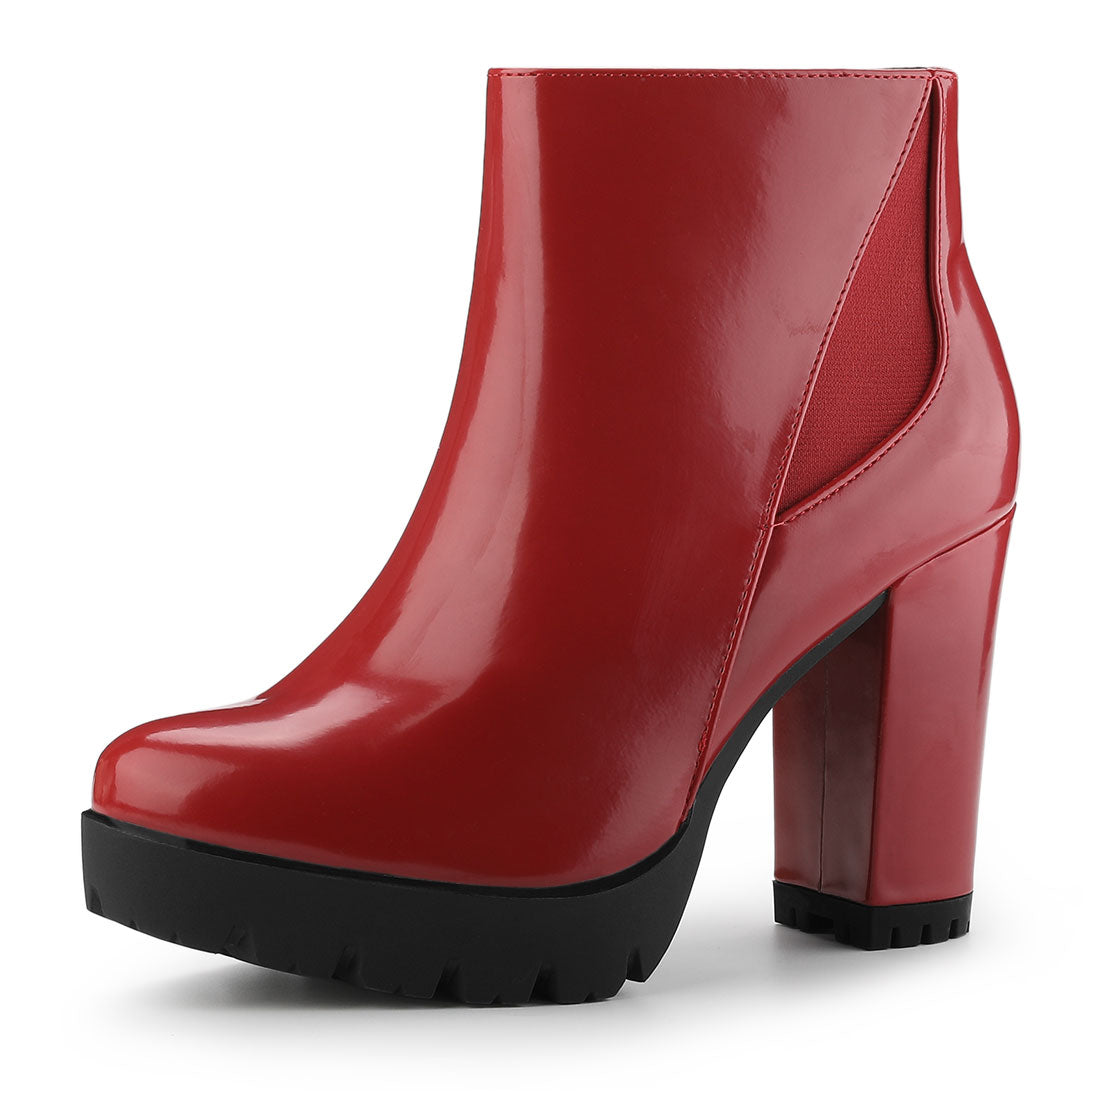 Allegra K Rounded Toe Chunky Heel Platform Ankle Boots